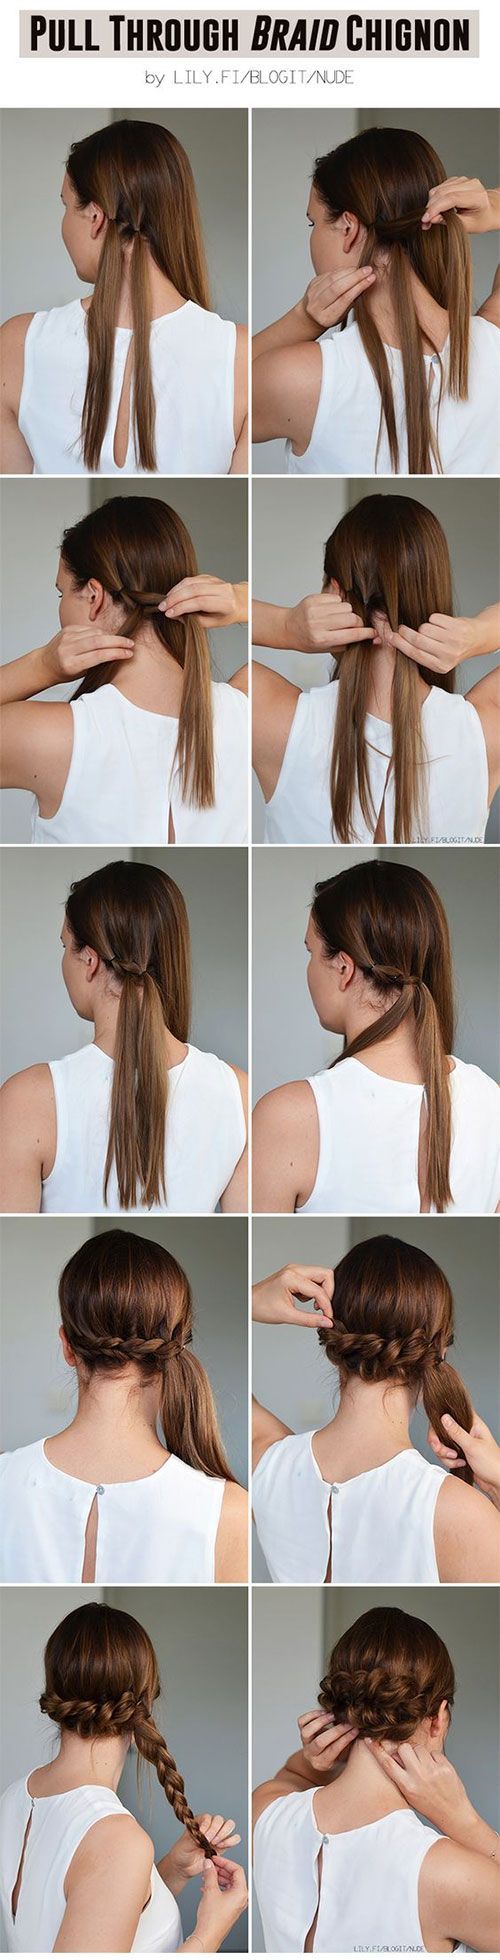 updos for girls with long hair — easy hairstyle tutorials for prom/wedding/etc!!